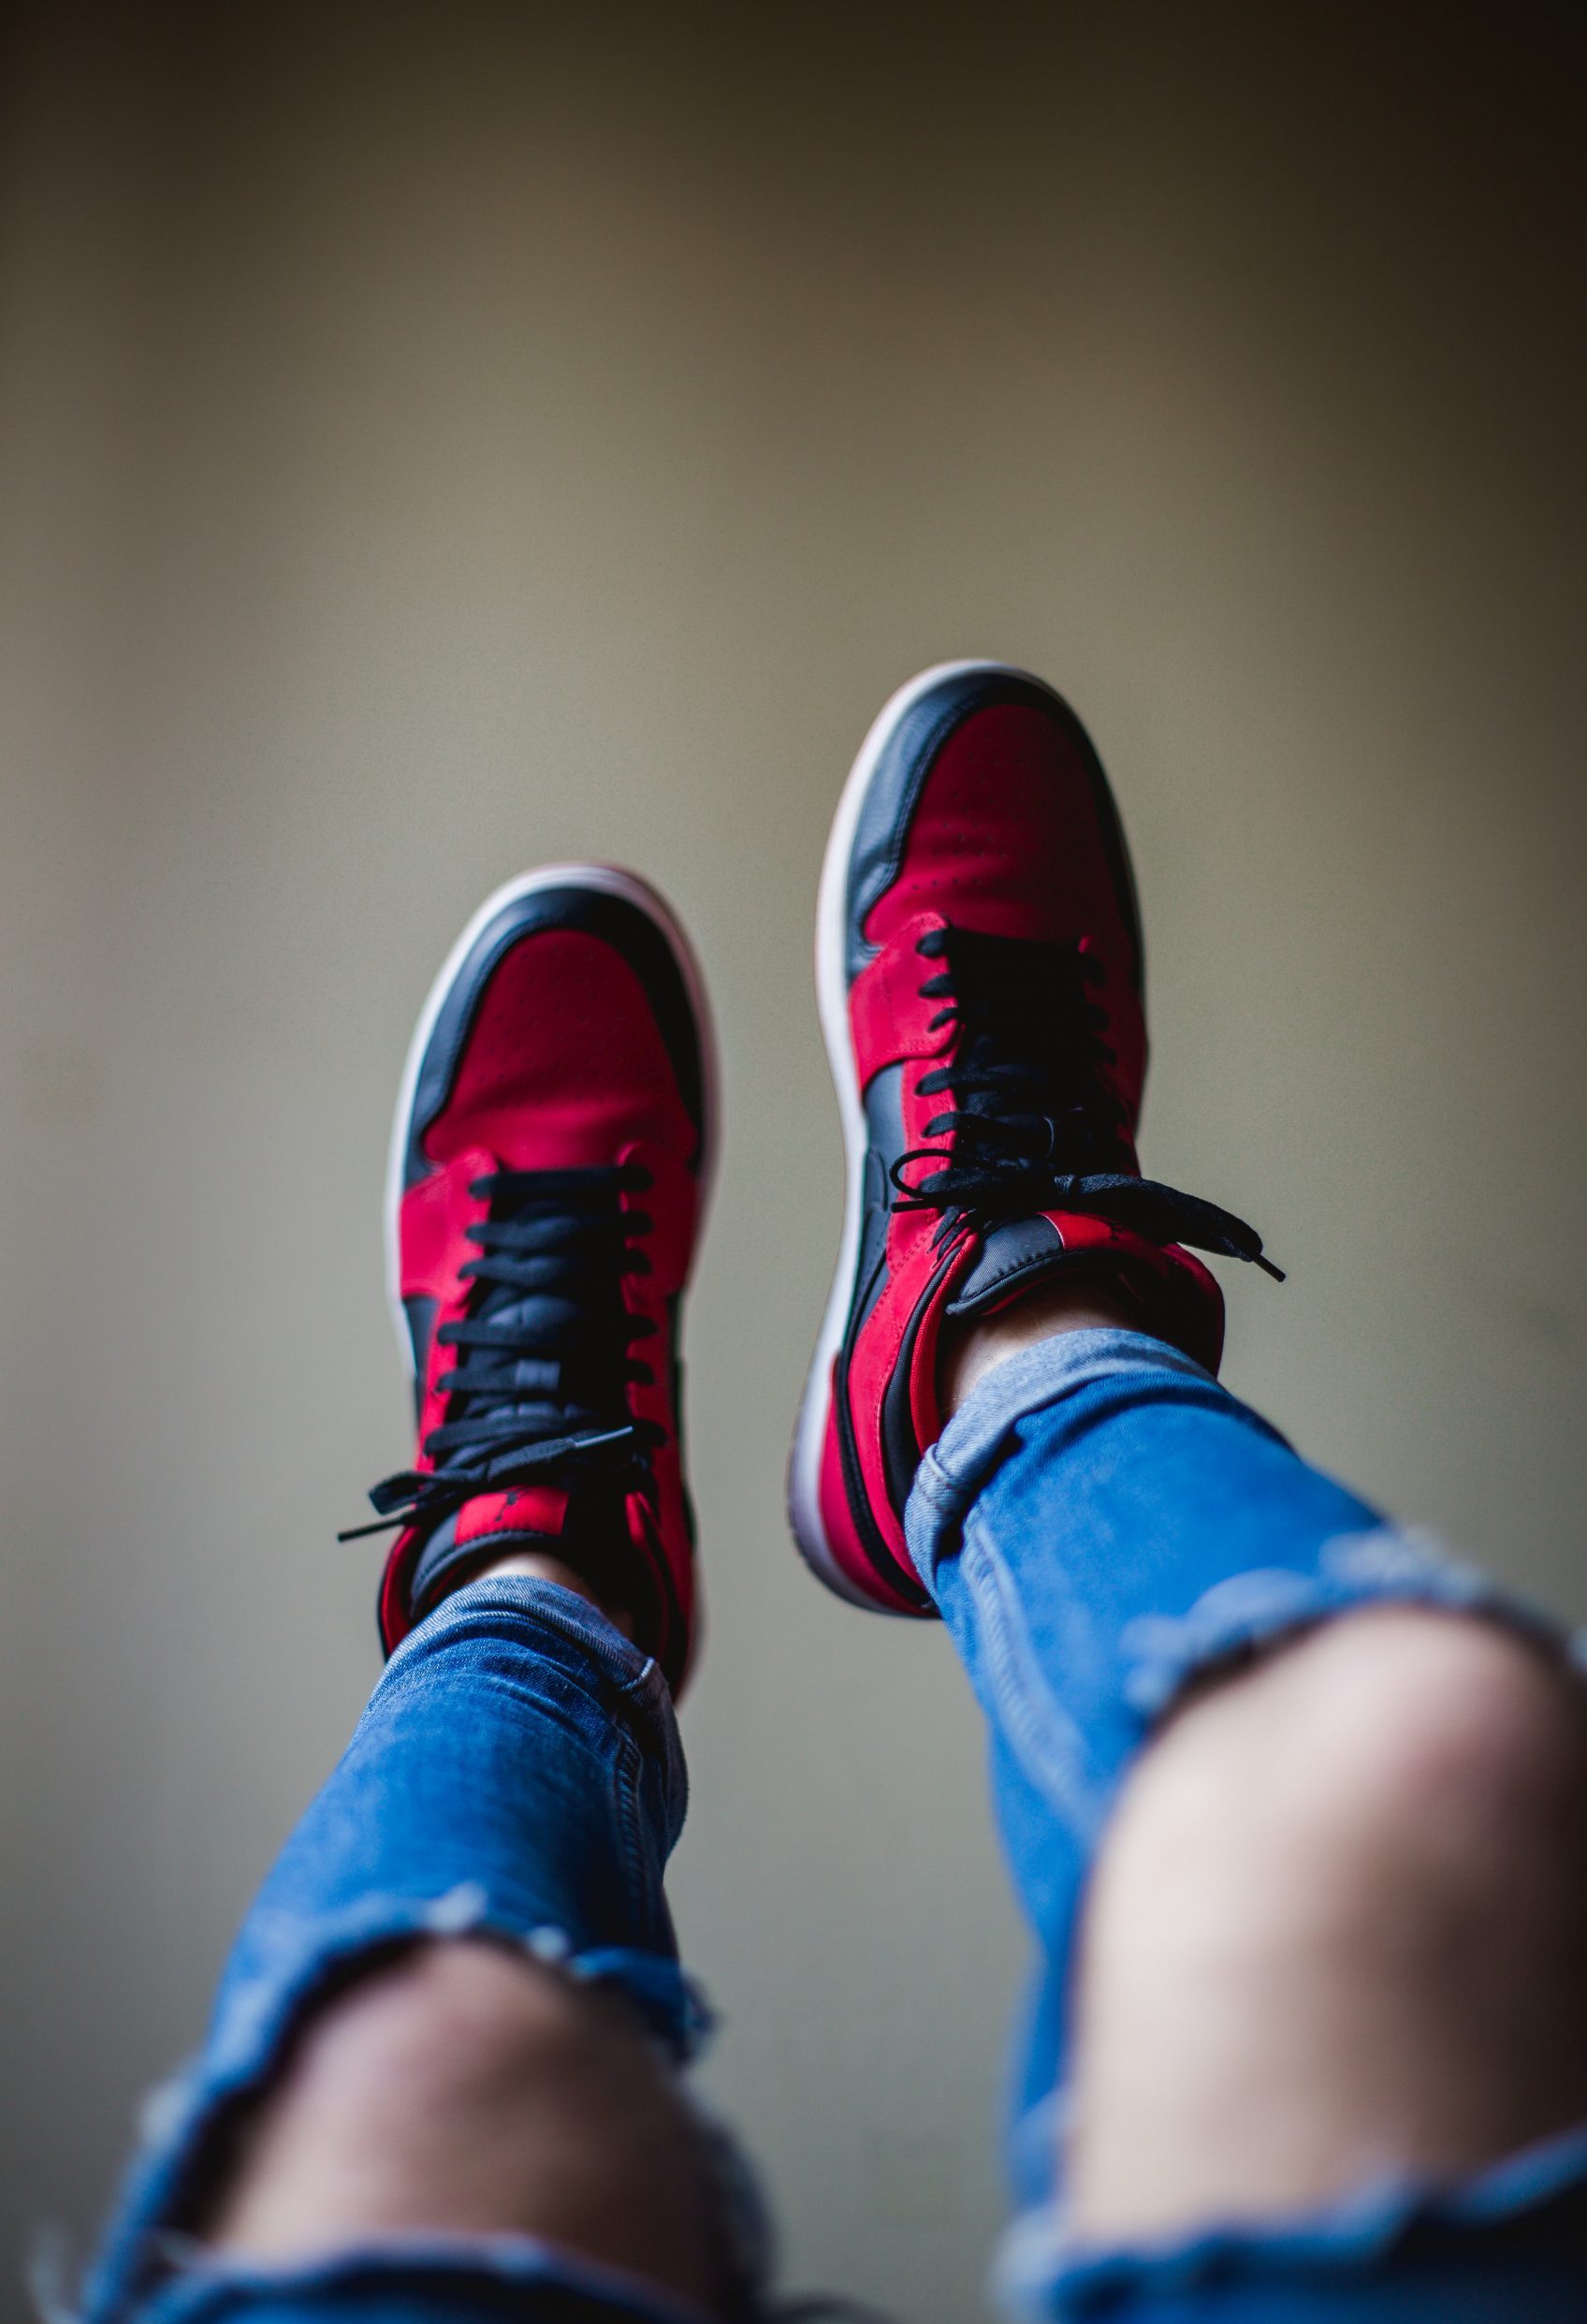 Pair of Air Jordan sneakers worn on a person with trendy looking ripped jeans.